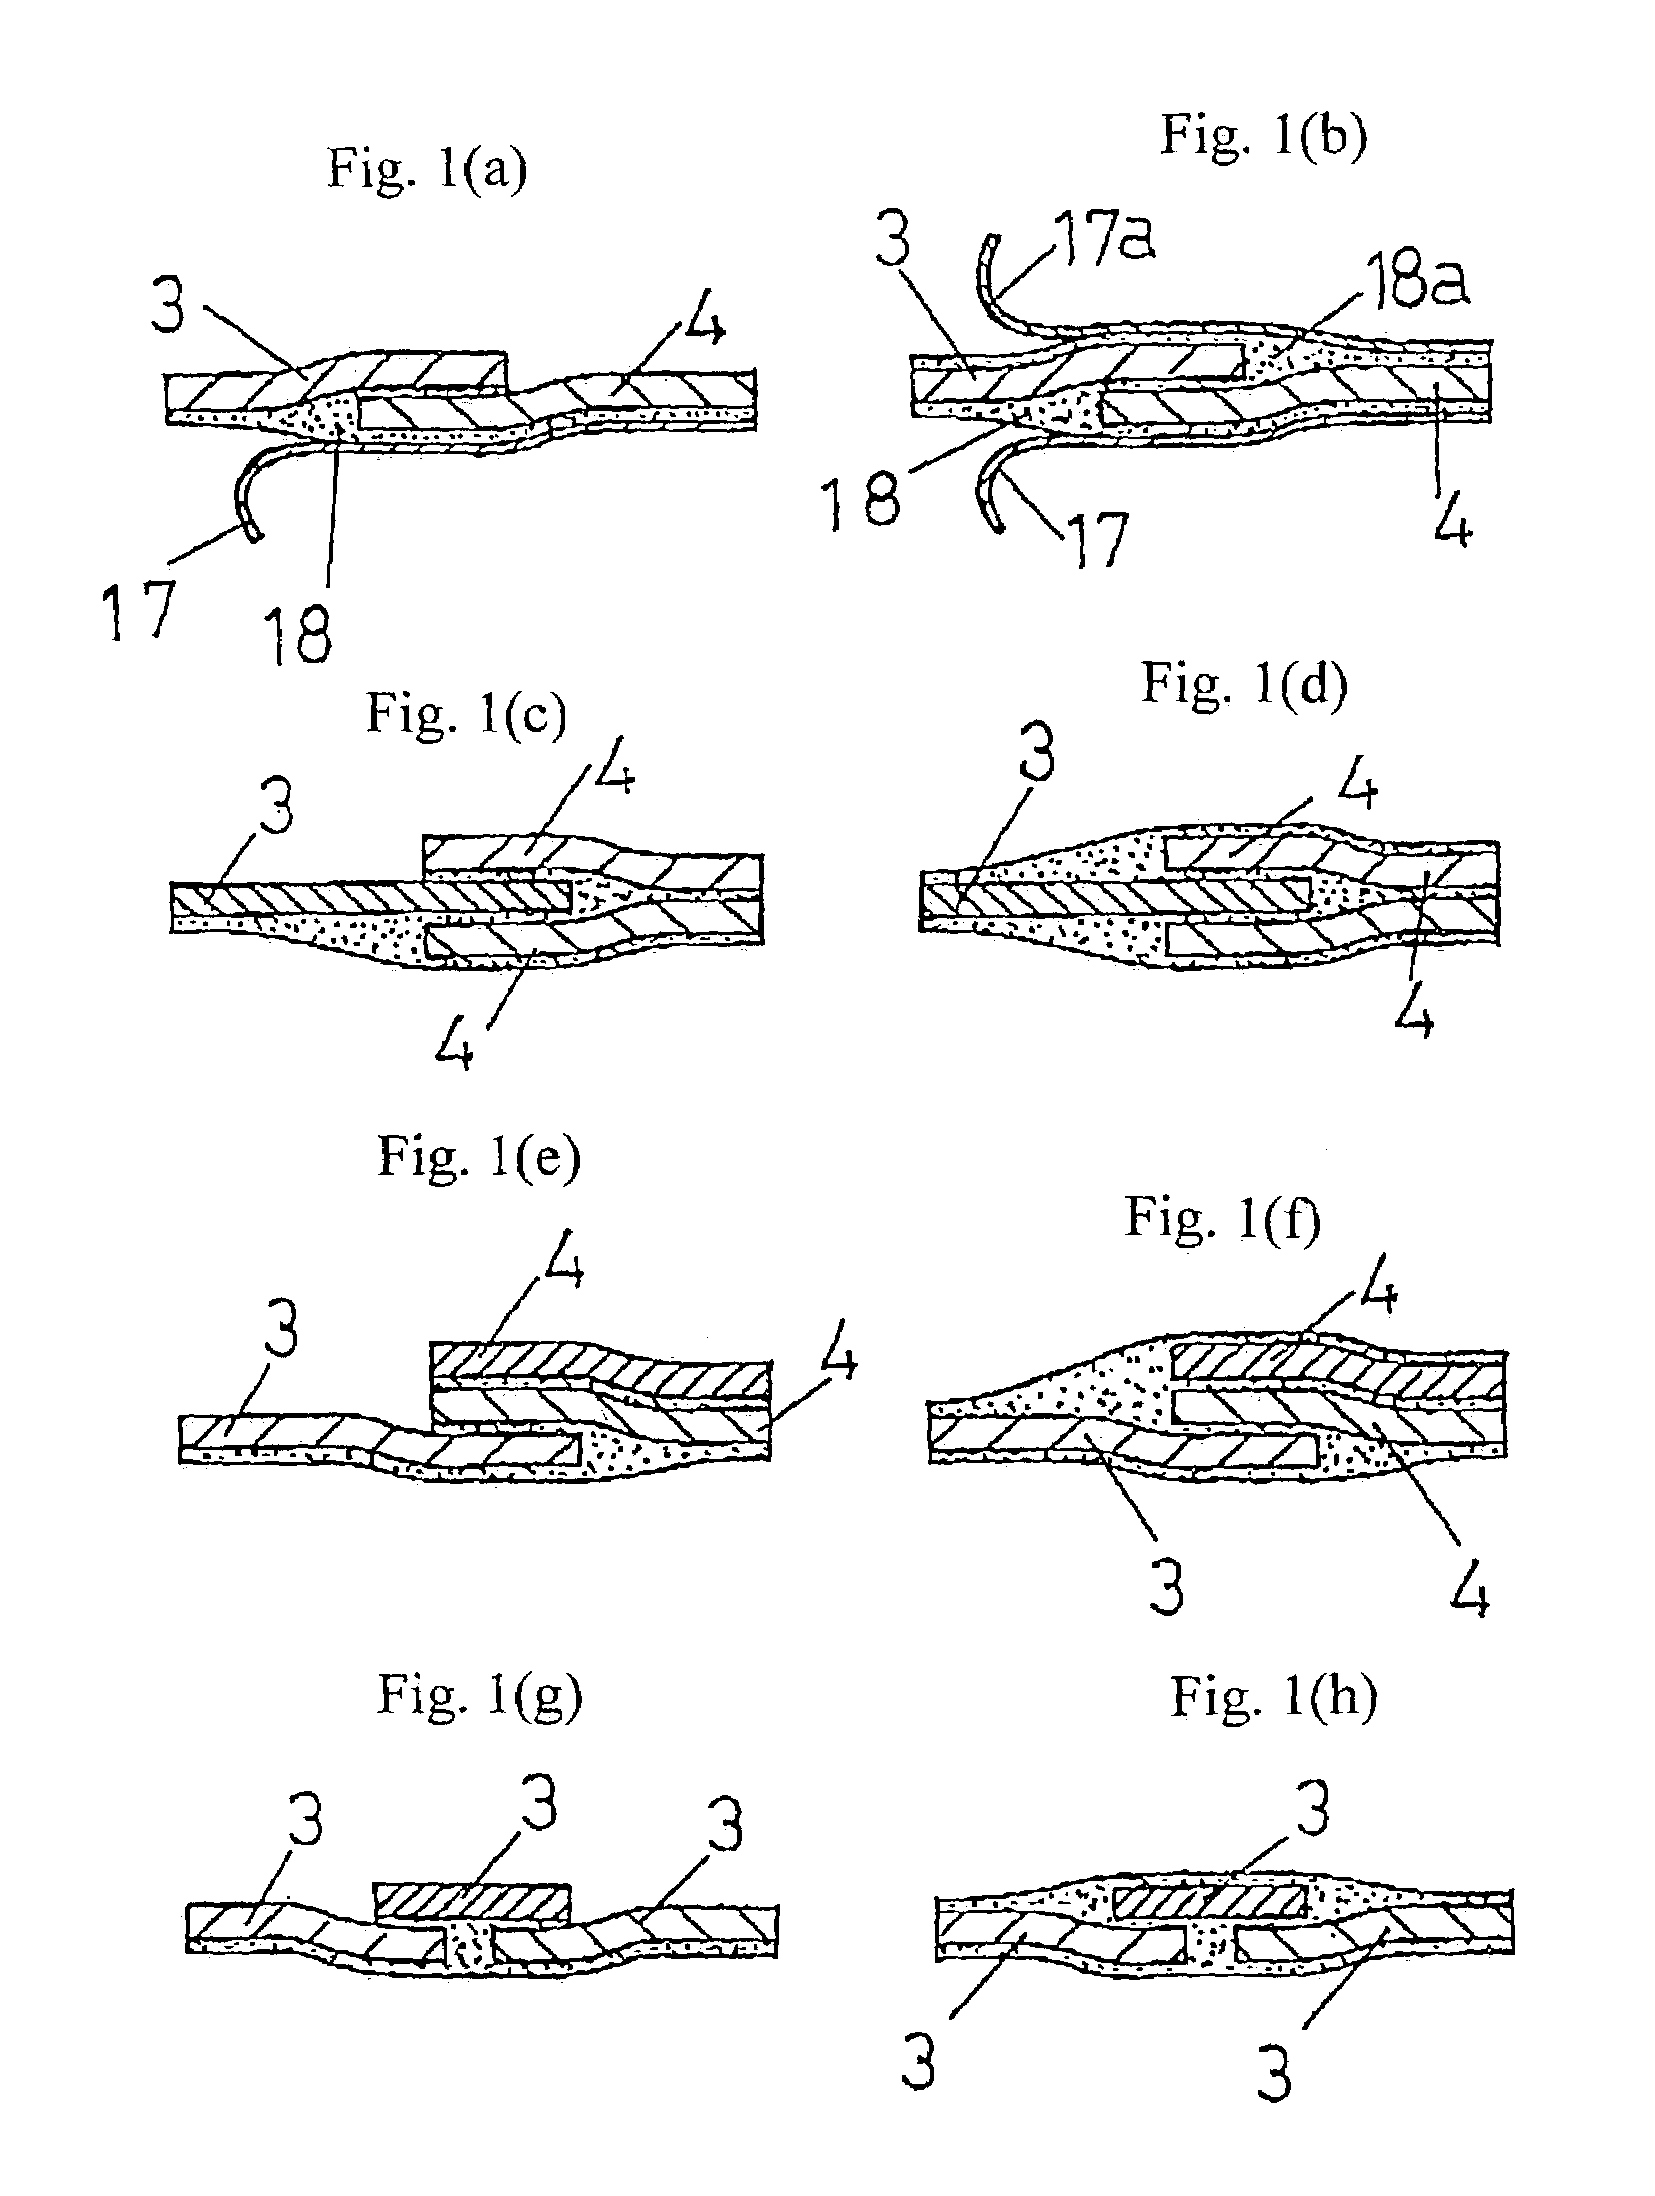 Device and method for tensioning a screen on a screen printing frame